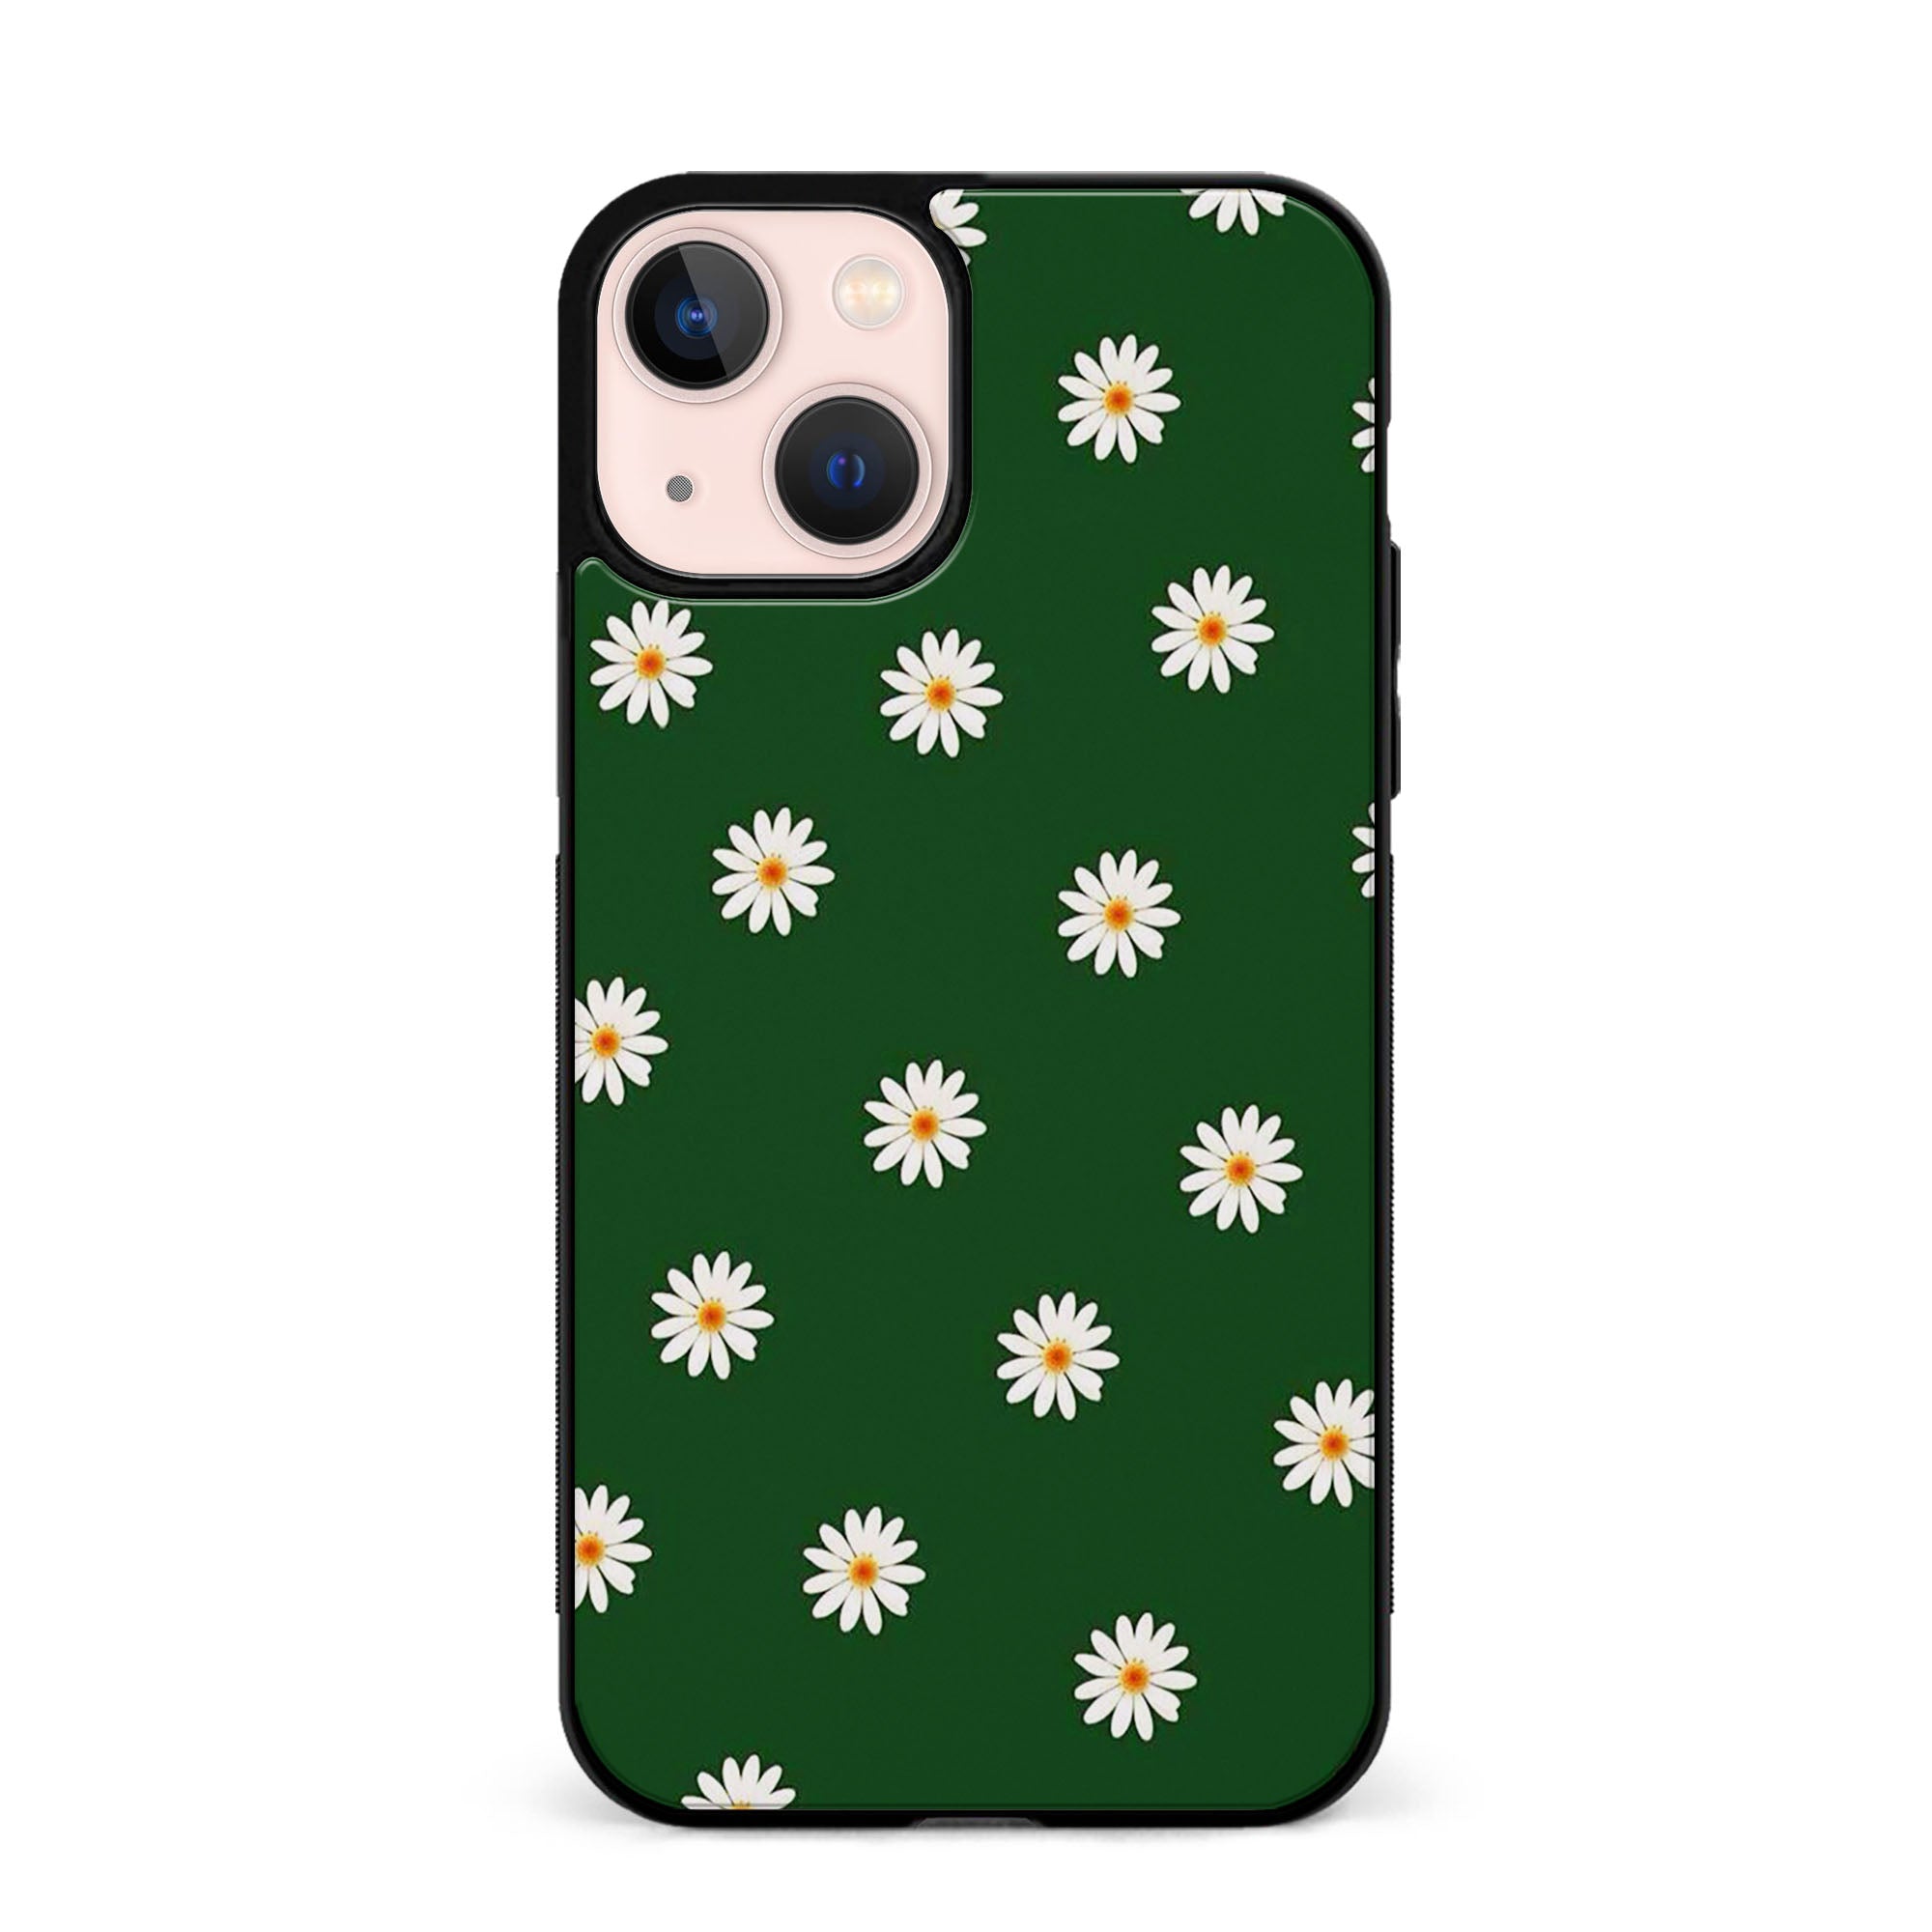 Daisies On Green Rubber Phone Case for iPhone, Samsung, Huawei & Pixel